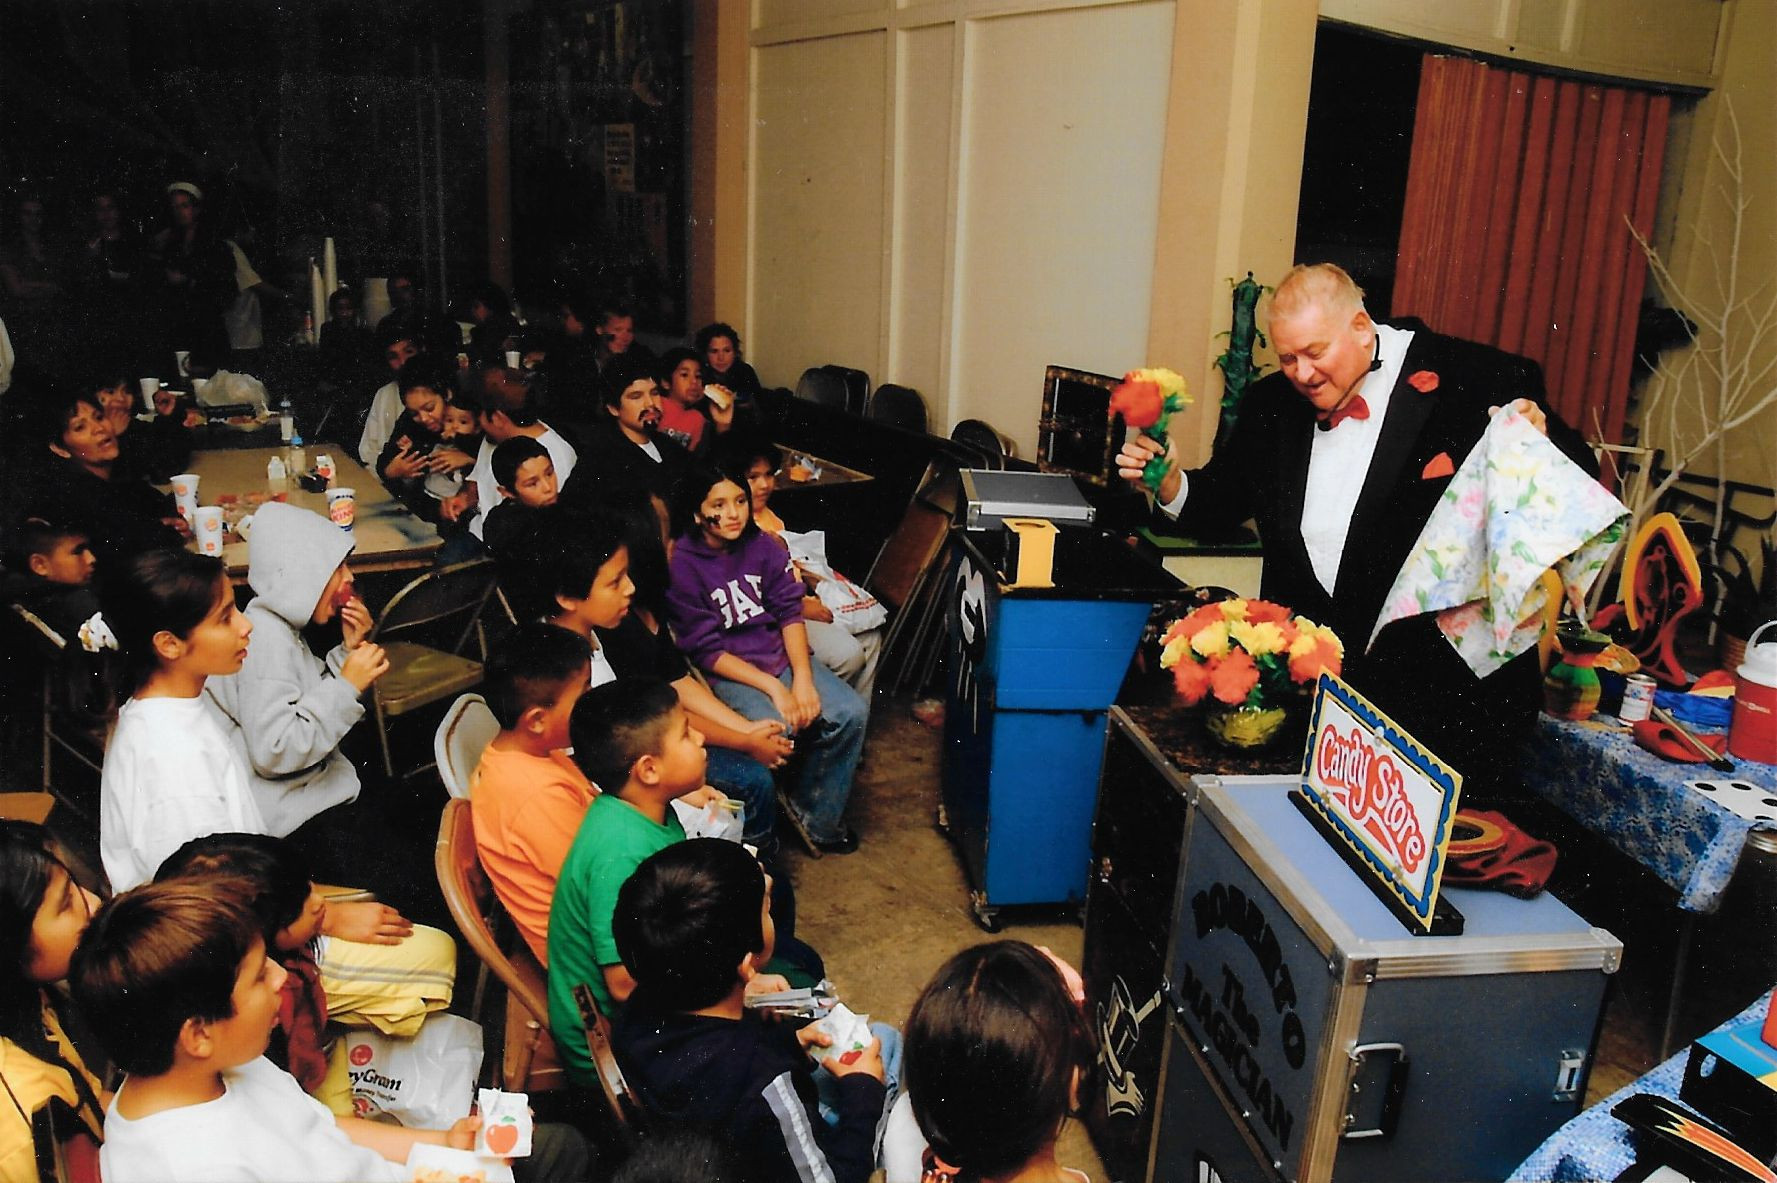 Kids Party Magic Show
 Hire a Magic Show for a Kid s Birthday Party